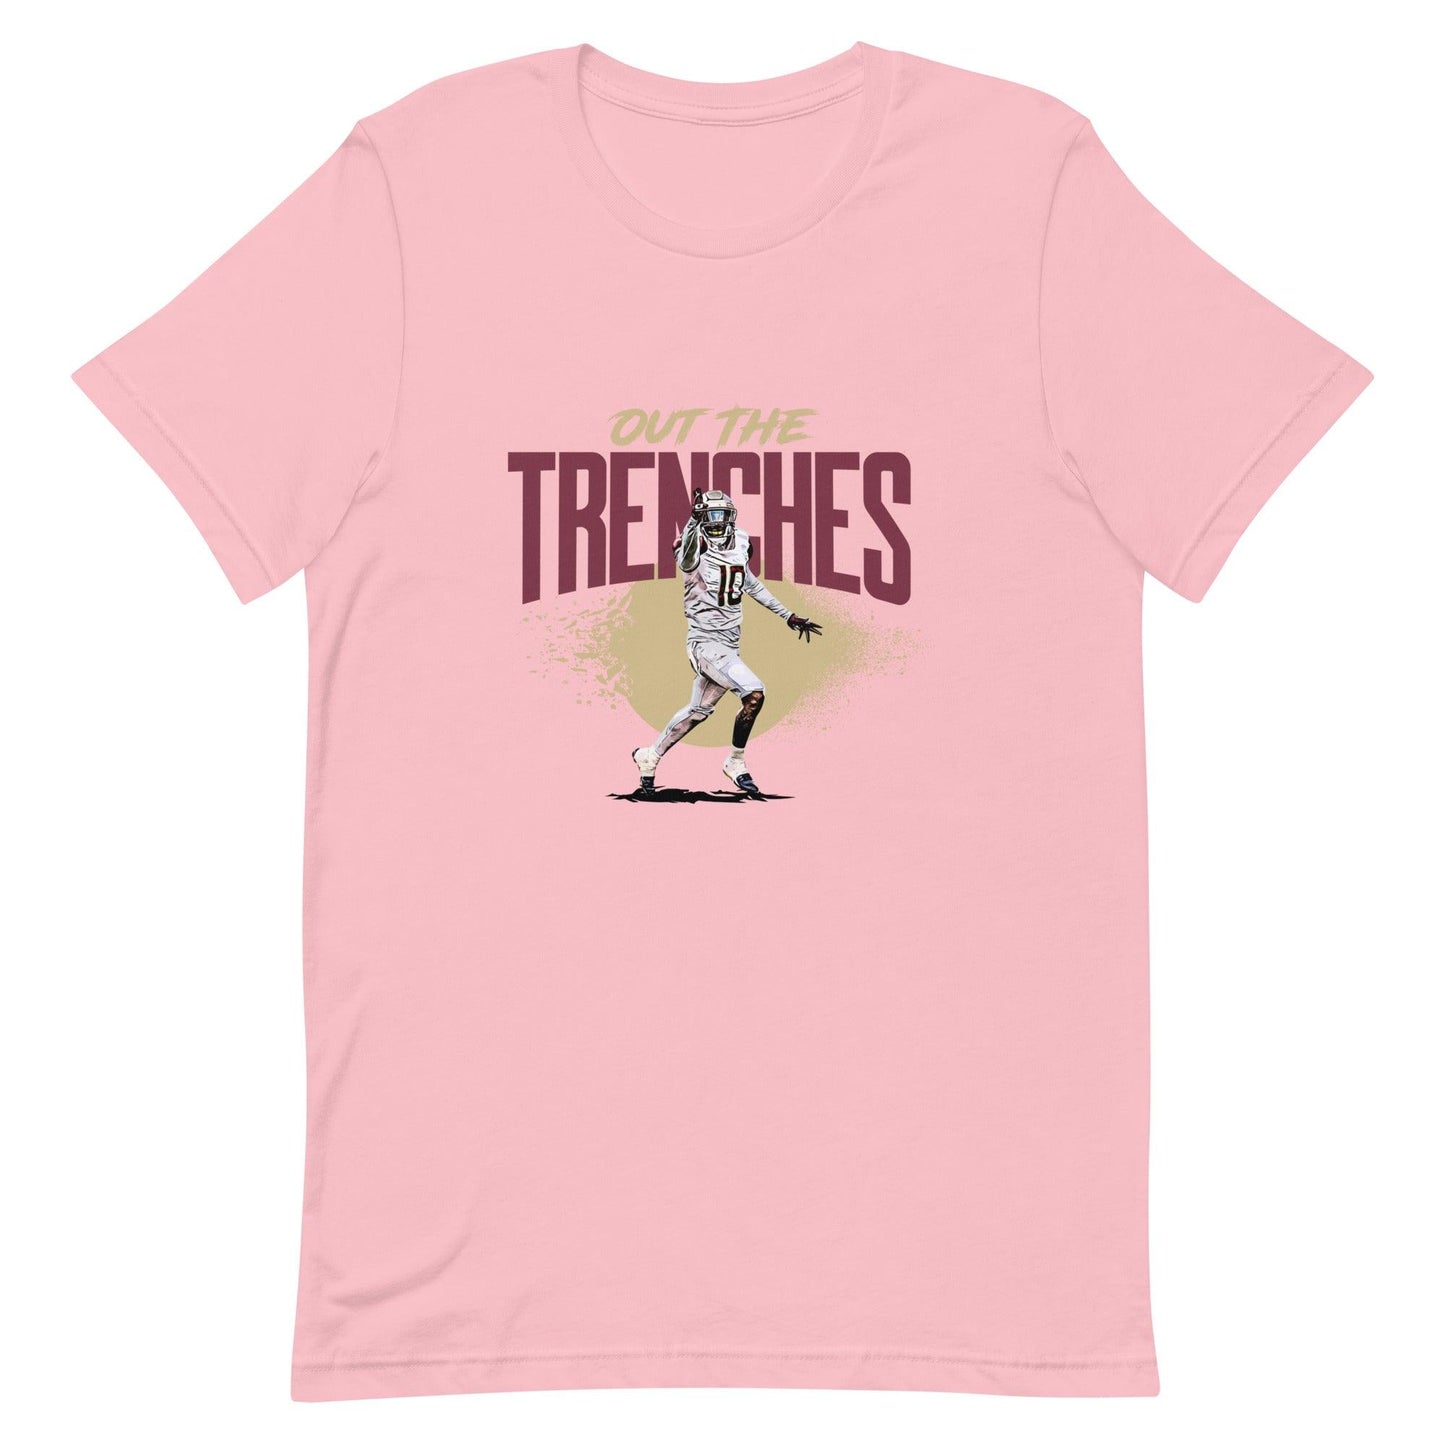 Jammie Robinson "Out The Trenches" t-shirt - Fan Arch